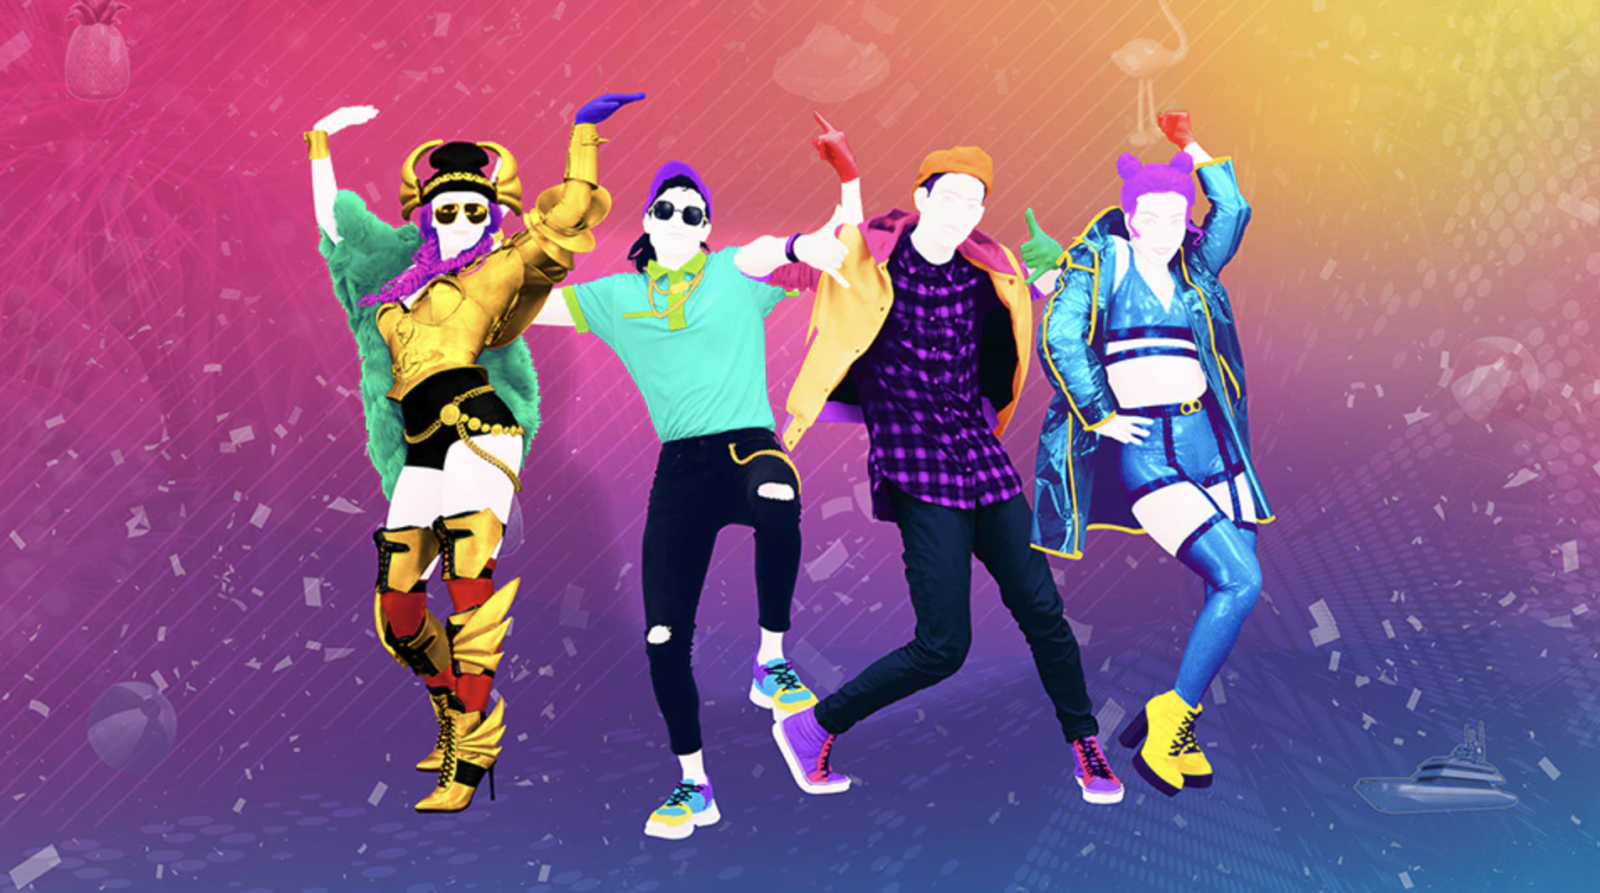 Four characters wearing wacky outfits stand in dance poses in front of a coloured gradient background.